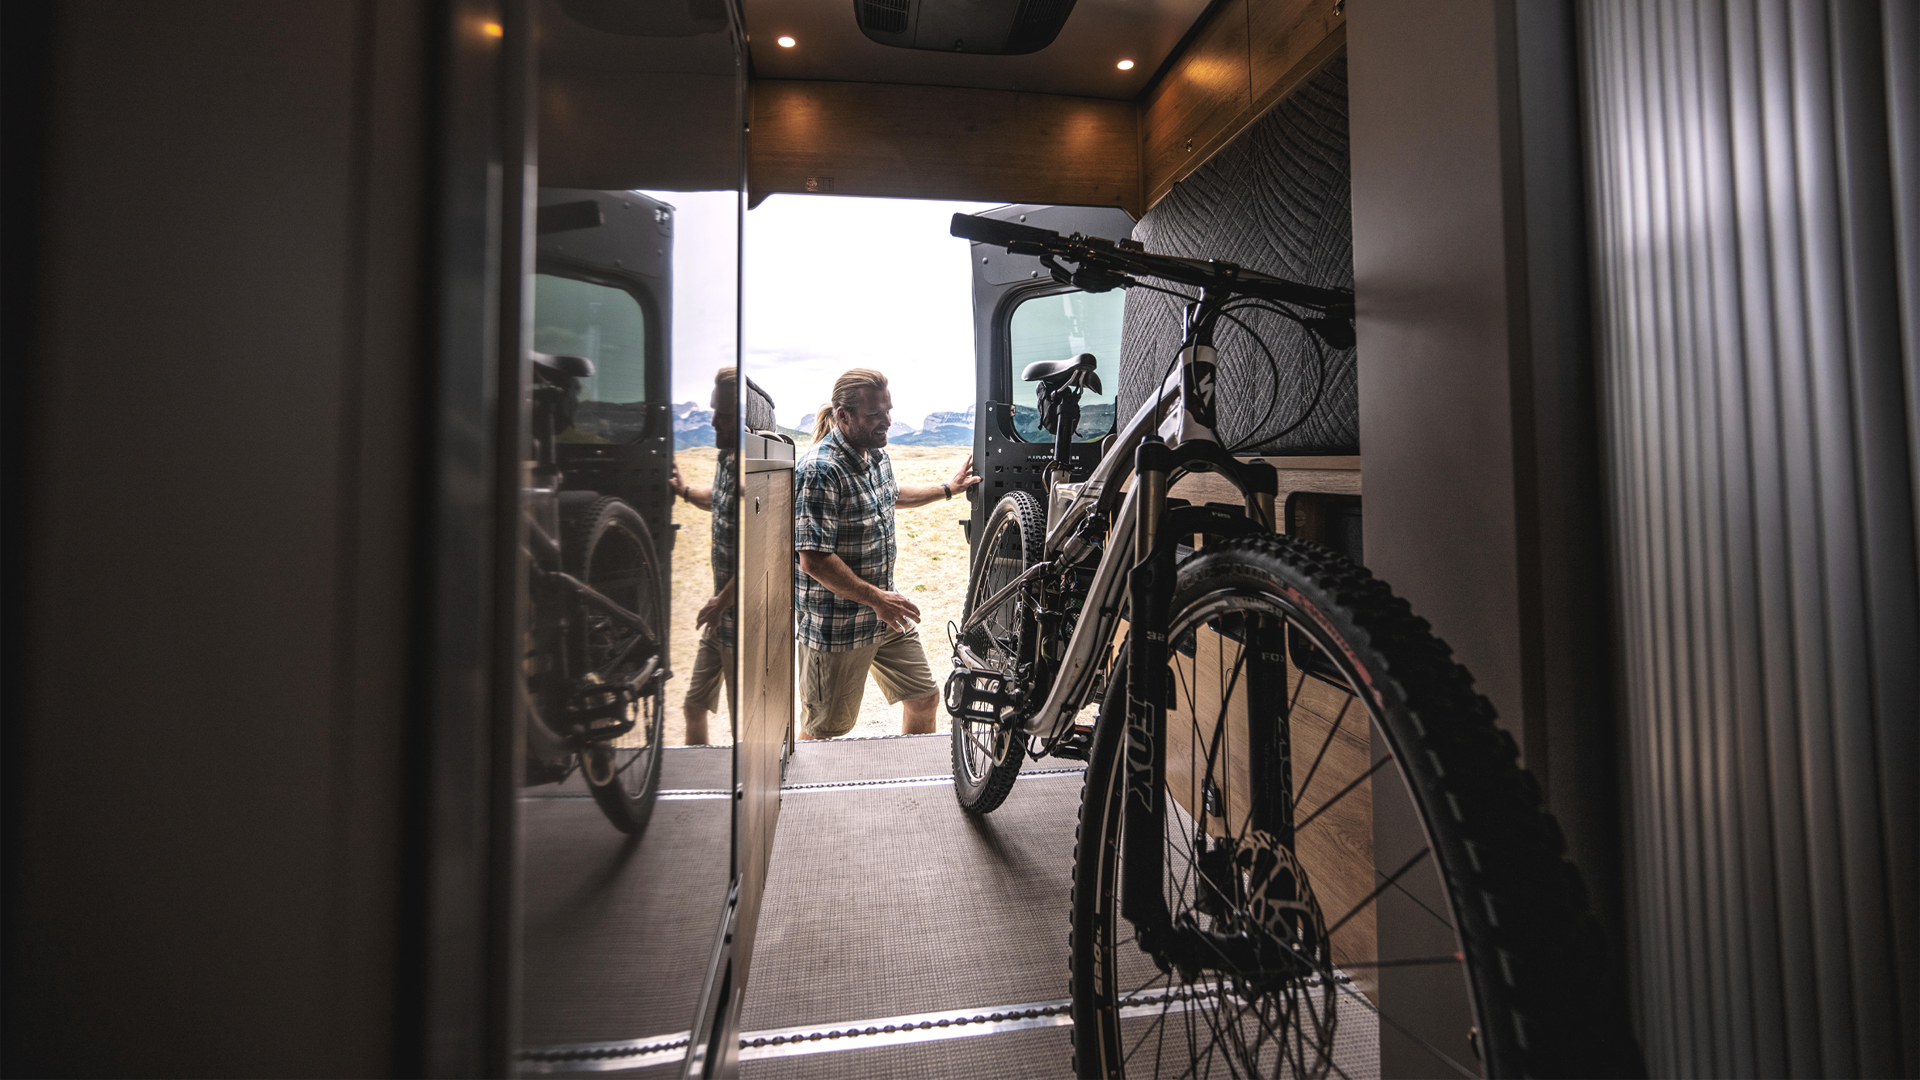 A bike being stored in the Airstream Class B